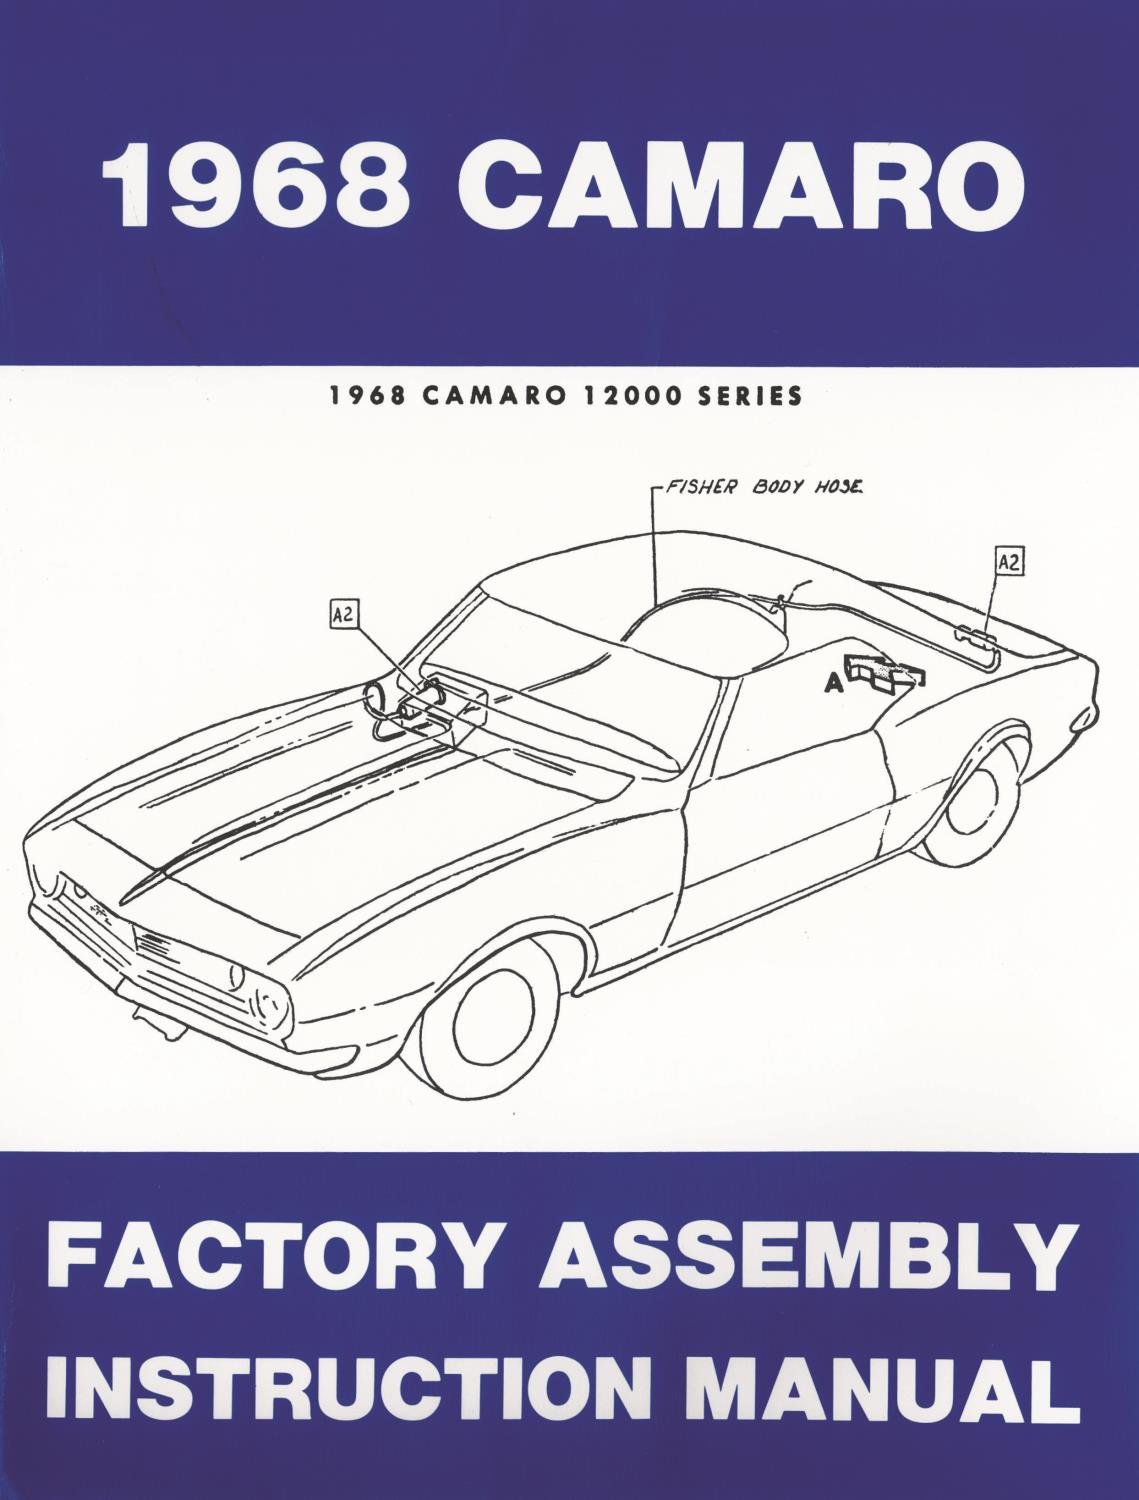 Factory Assembly Instruction Manual for 1968 Chevrolet Camaro